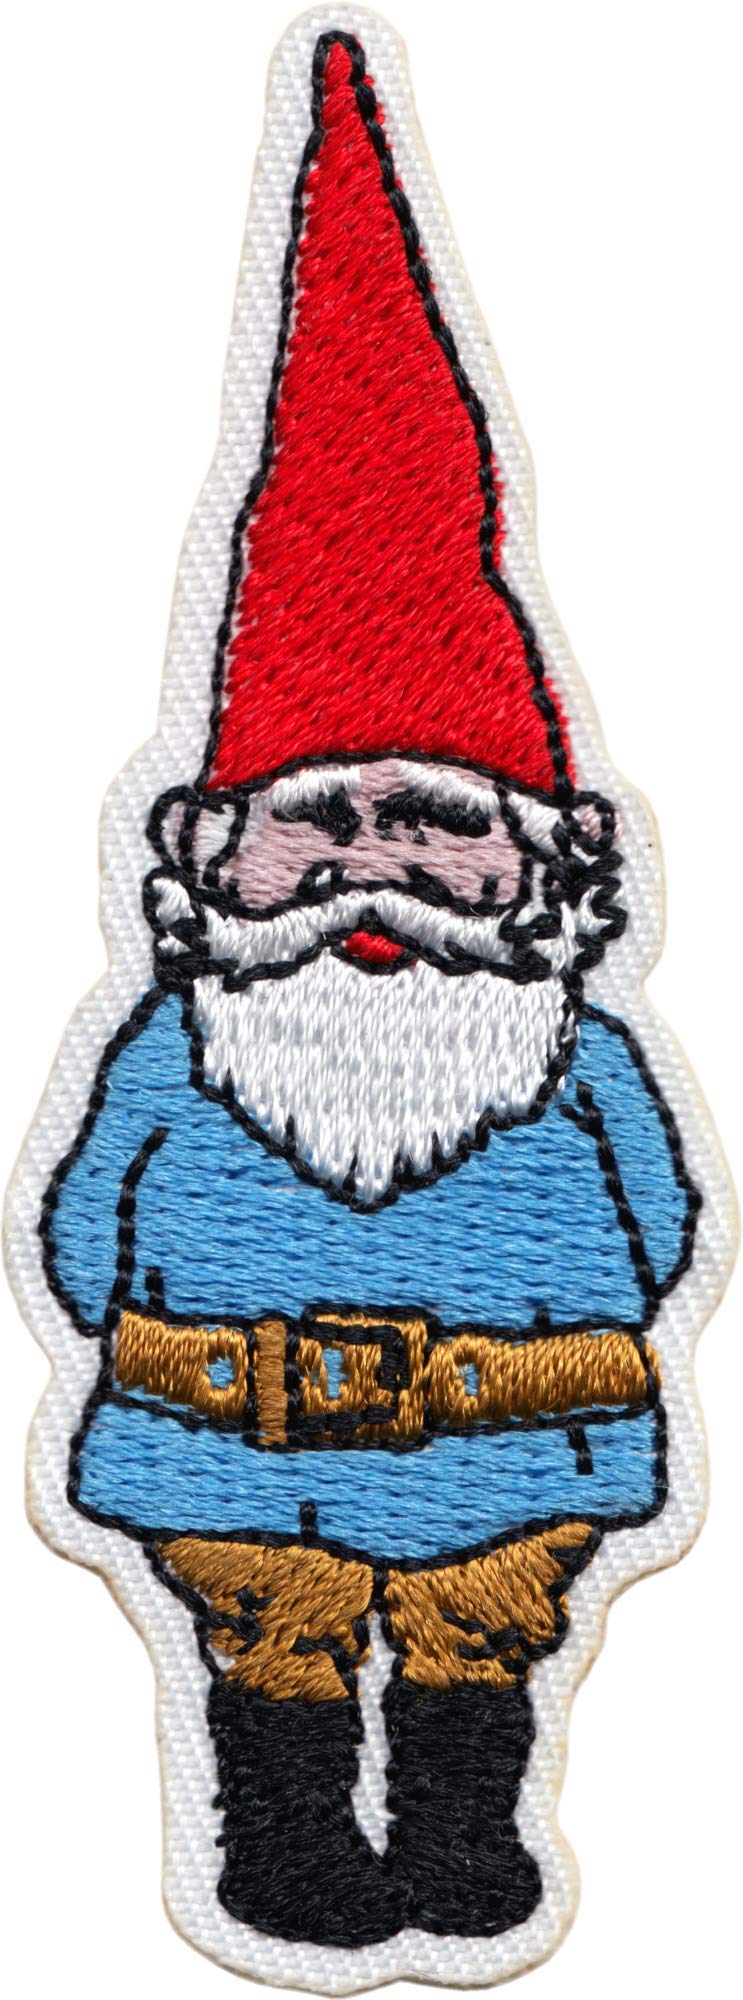 Gnorm The Garden Gnome - Embroidered 3" Iron on Patch